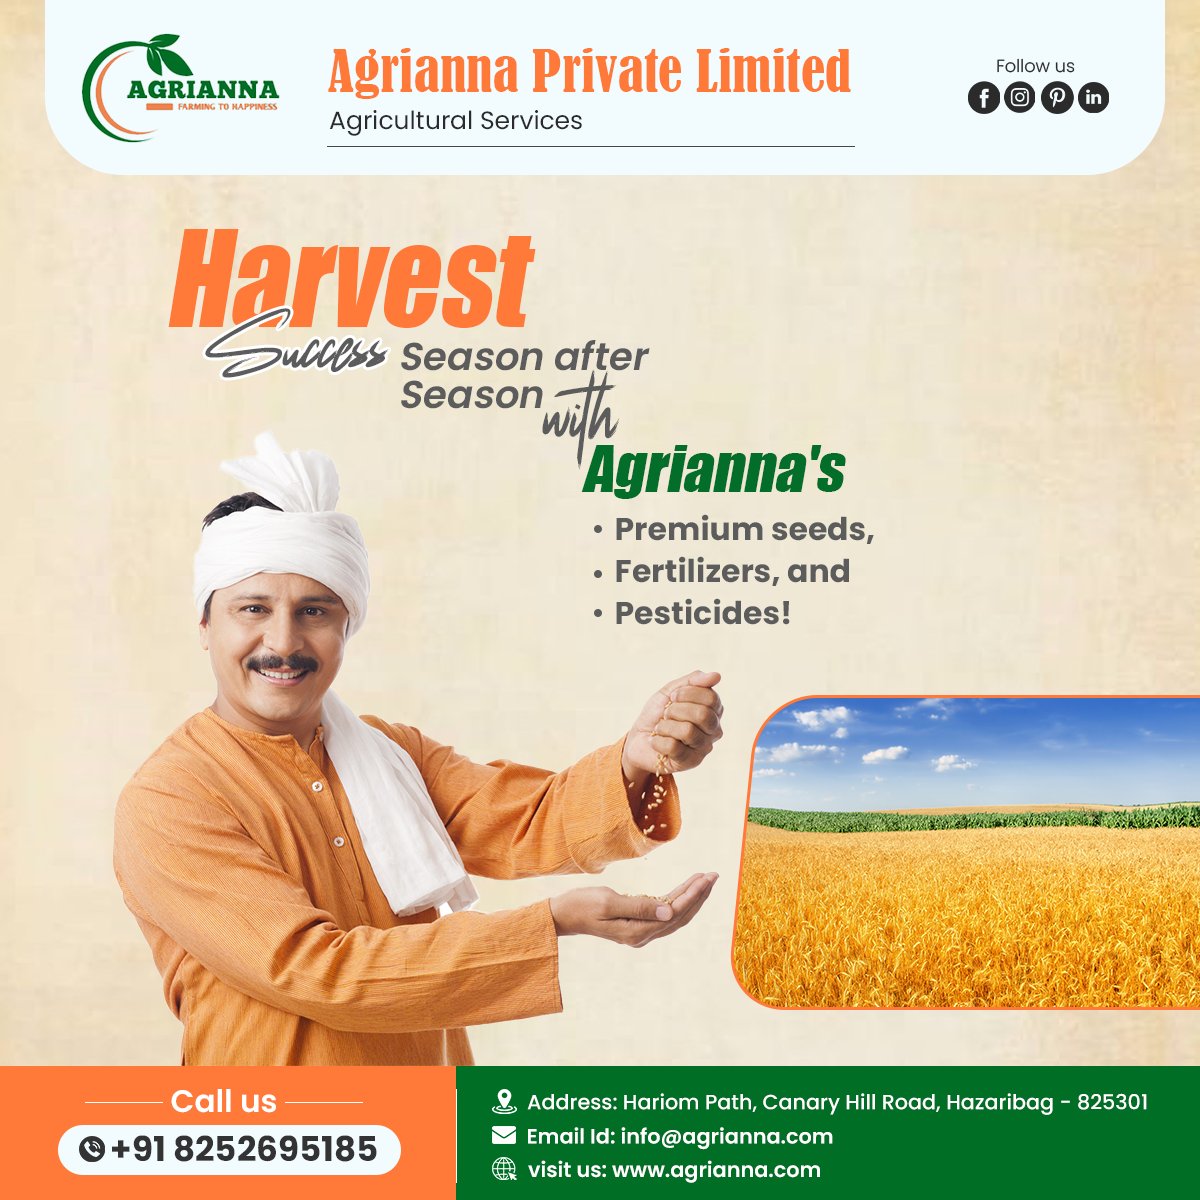 Harvest success, season after season, with Agrianna's premium seeds, fertilizers, and pesticides! 🌱🚜
Reach us -
Address-Hariom Path, Canary Hill Road, Hazaribag - 825301
Email id- agriannaprivatelimited@gmail.com.
#agrianna #cattlefeed #feed #agricultutre #agriproducts